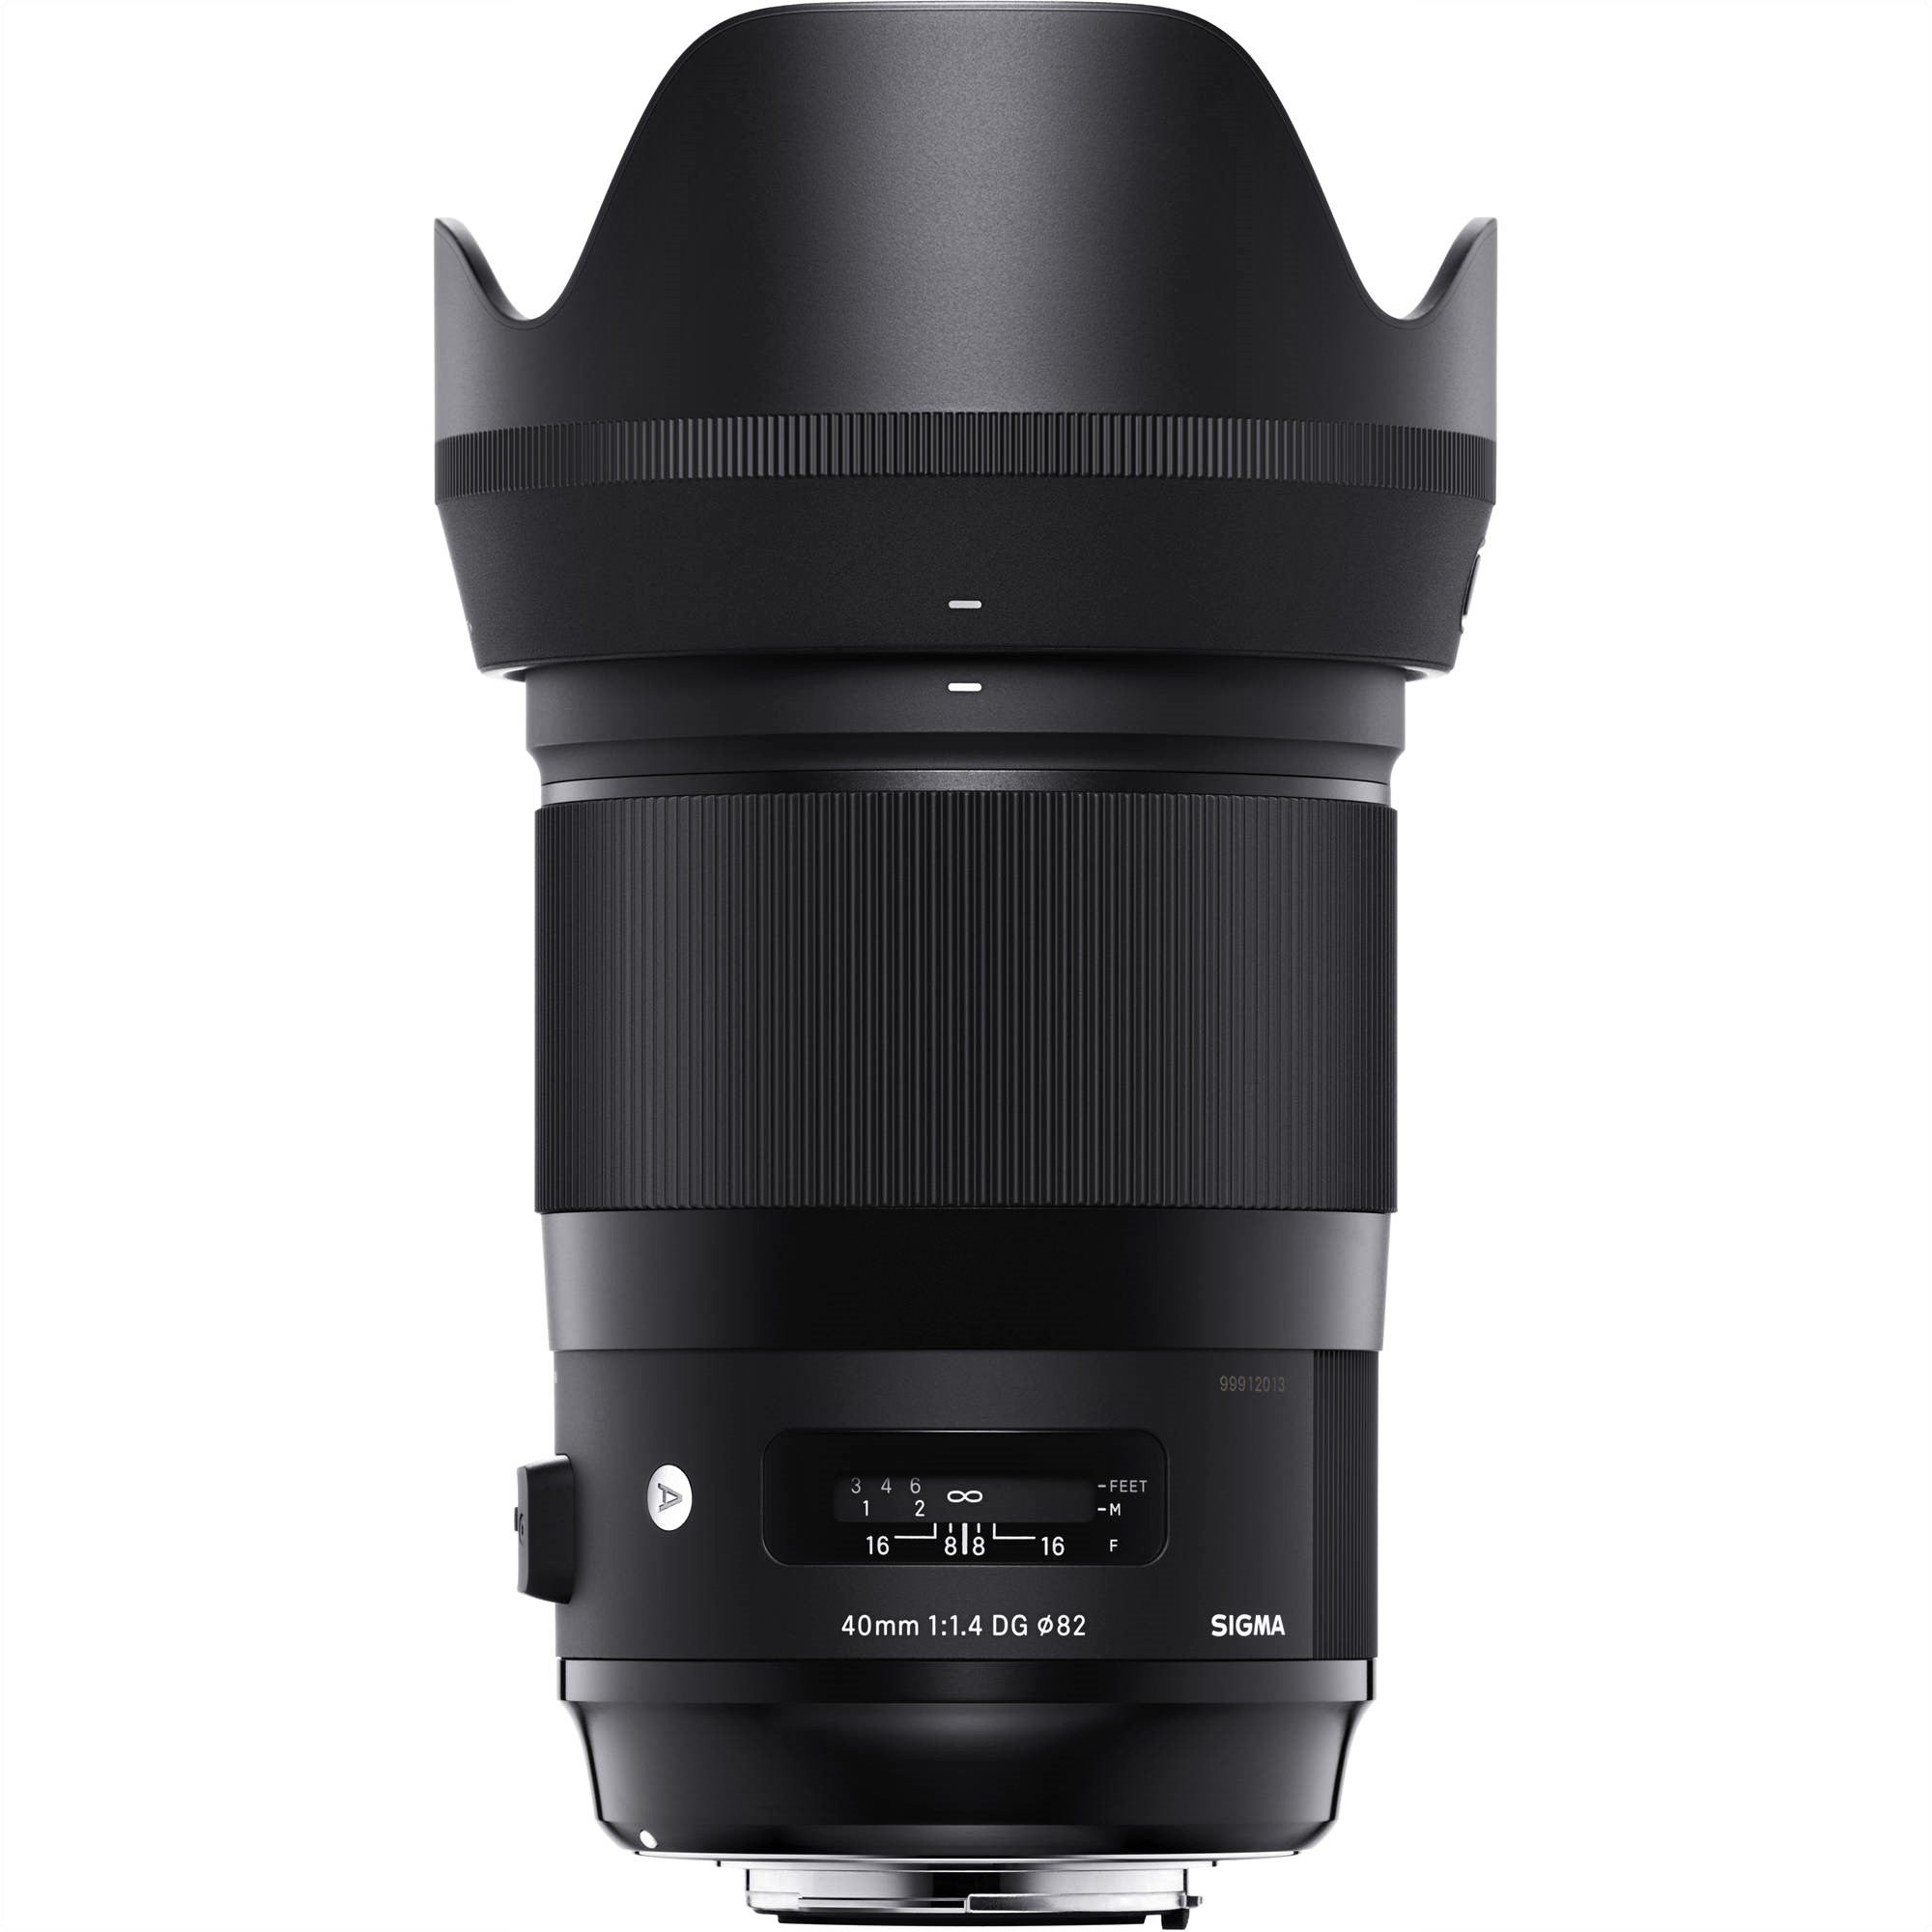 Sigma 40mm F1.4 DG HSM Art Lens for Sony E with Attached Lens Hood on the Top